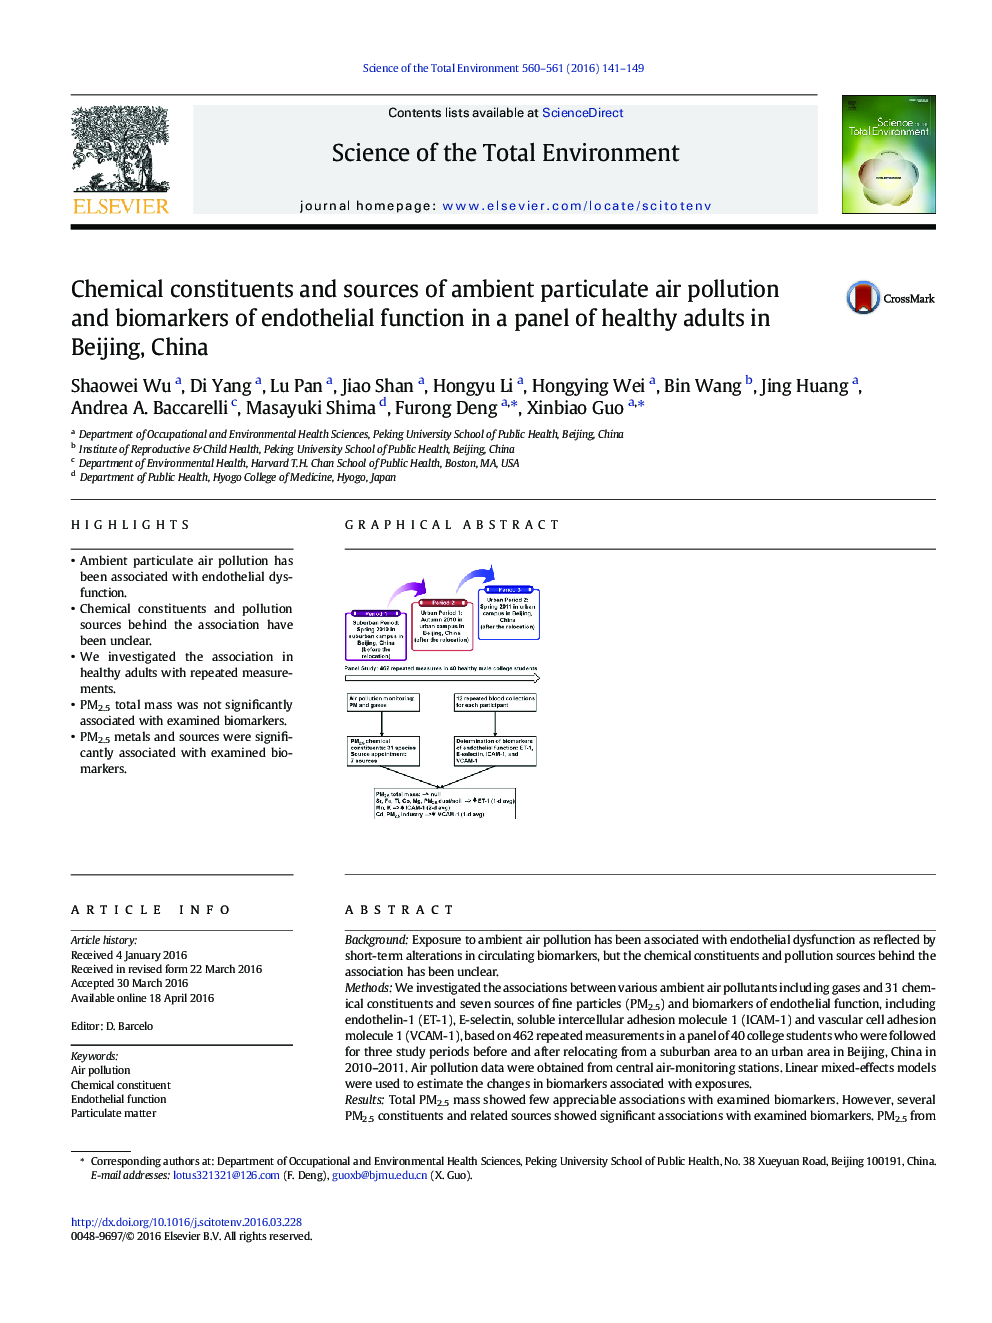 Chemical constituents and sources of ambient particulate air pollution and biomarkers of endothelial function in a panel of healthy adults in Beijing, China